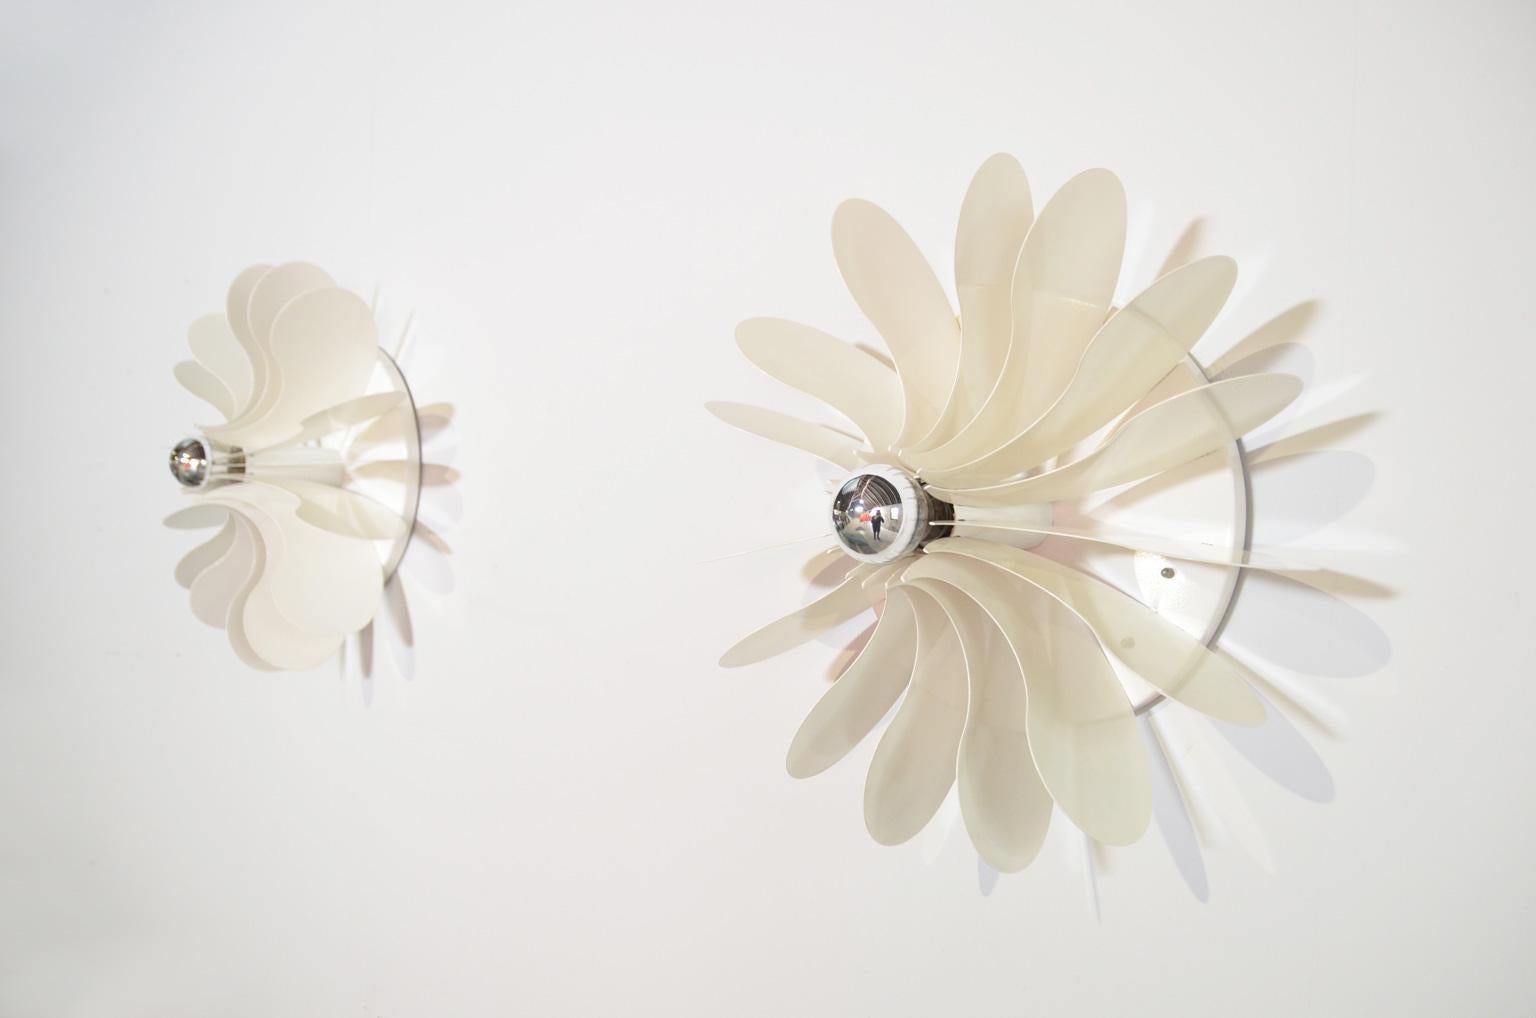 The Bolide (model B-1095) by Hermian Sneyders De Vogel for RAAK Amsterdam is a strong design looking like a sculpture when attached on the wall or ceiling. The off-white metal elements provide a graphic effect when the Bolide is lit.